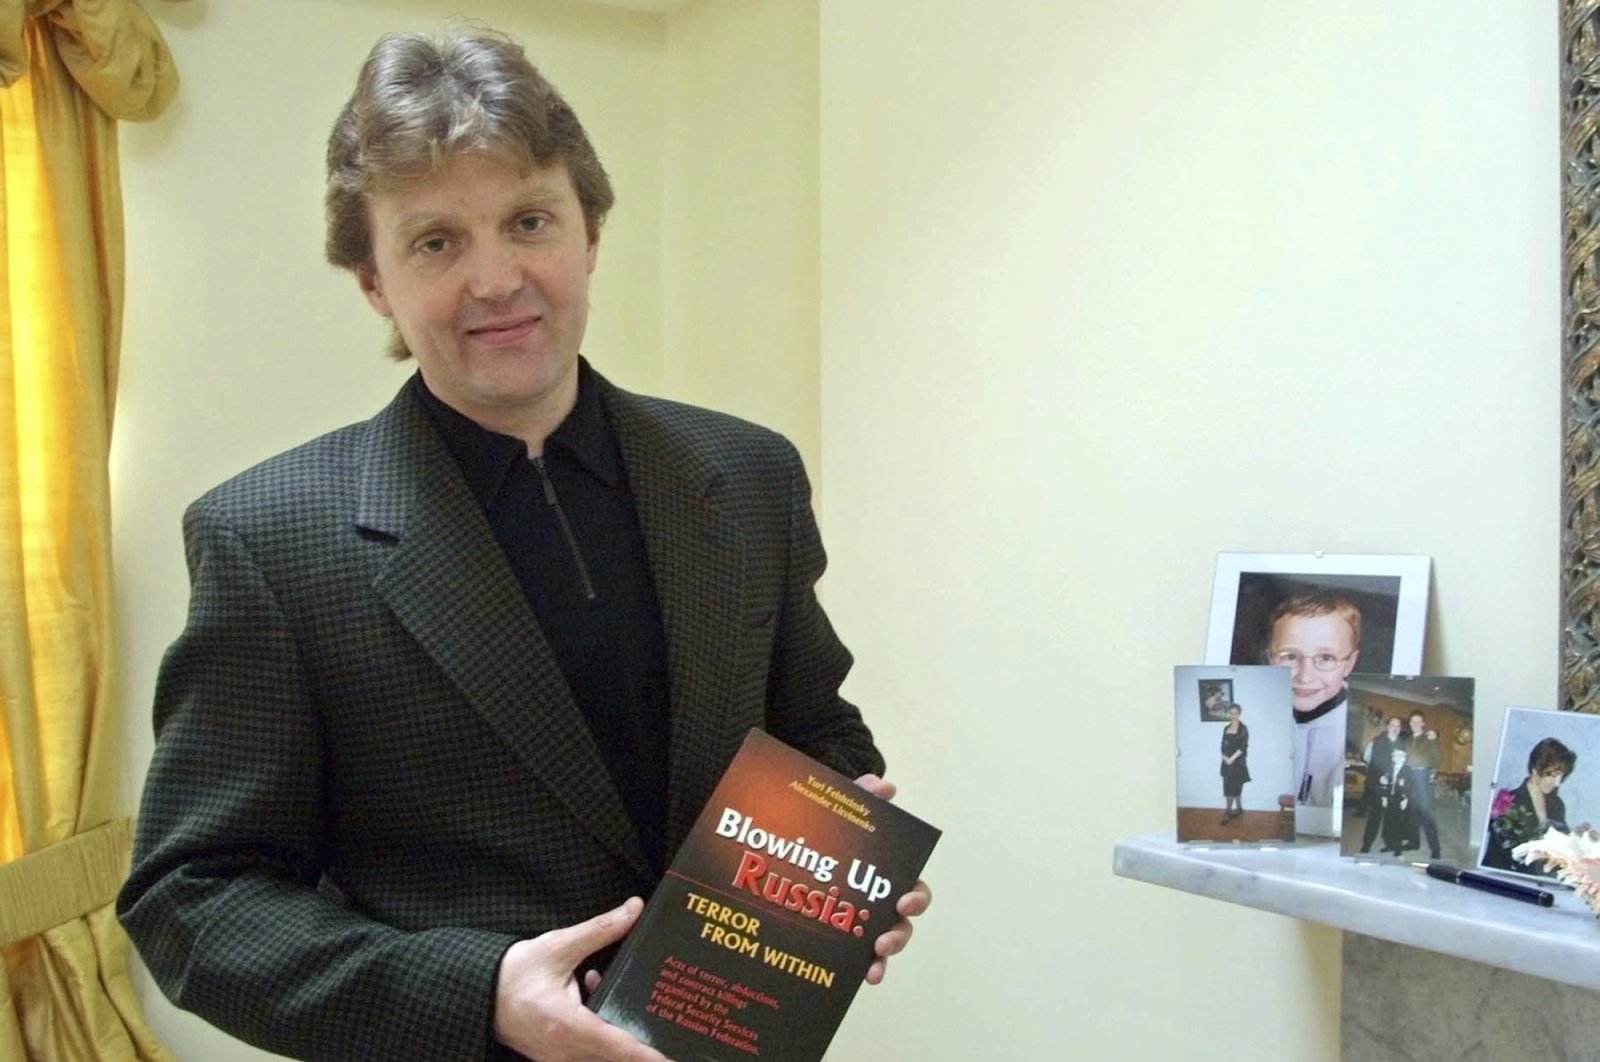 Alexander Litvinenko, former KGB spy and author of the book "Blowing Up Russia: Terror From Within" is photographed at his home in London, U.K., May 10, 2002. (AP Photo)